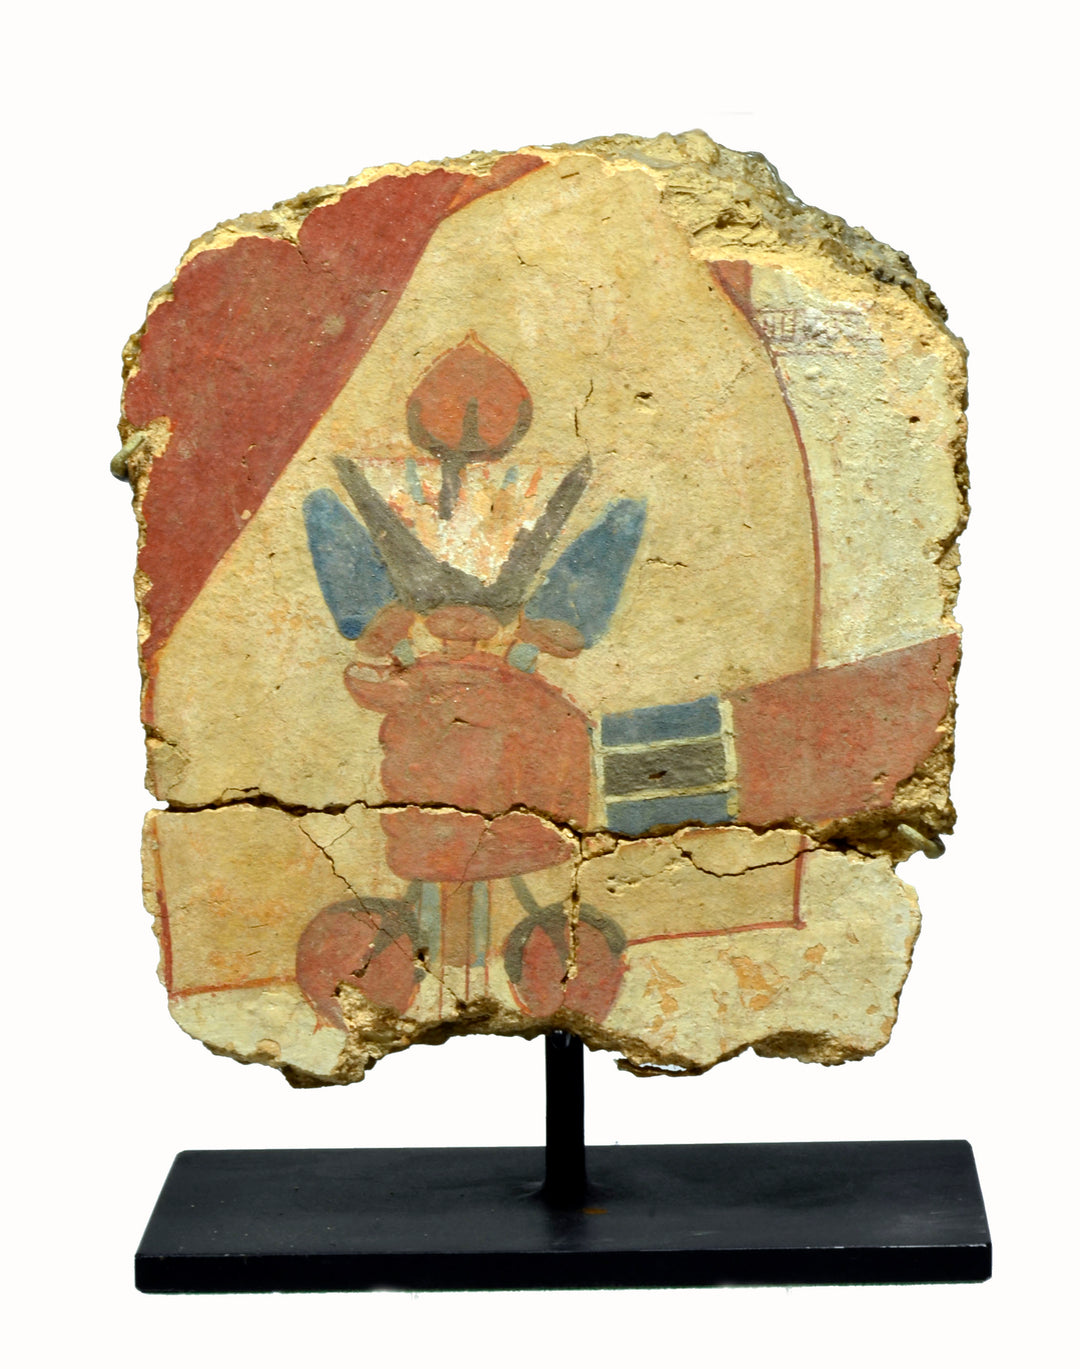 Egyptian Fresco Painting: Offerant with Bouquet of Lotus Flowers